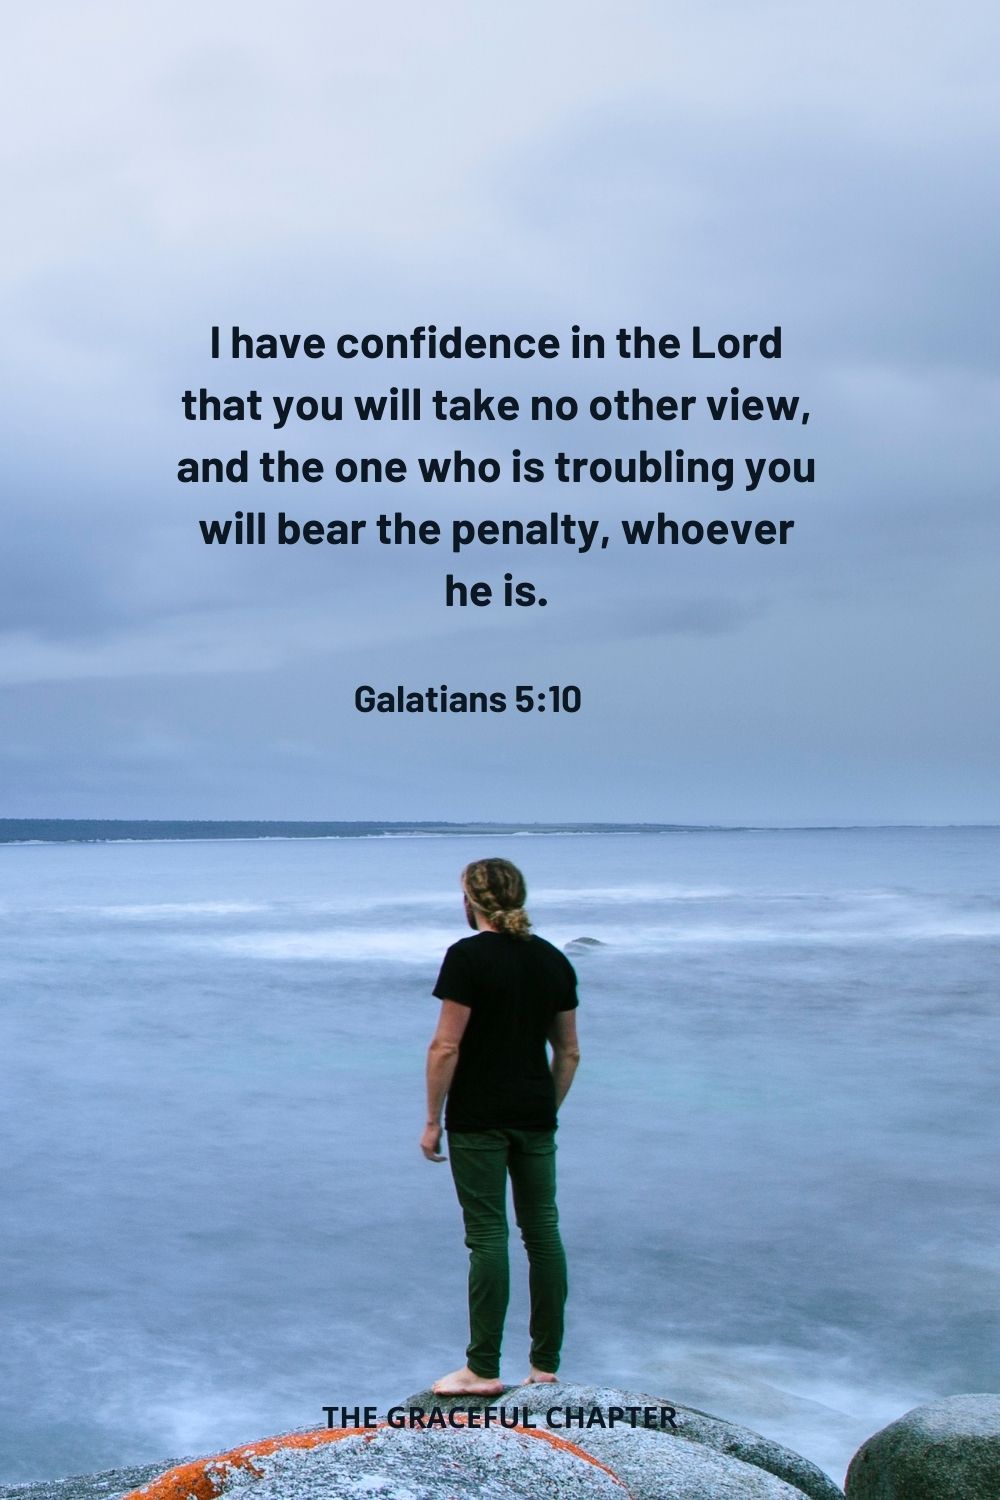 I have confidence in the Lord that you will take no other view, and the one who is troubling you will bear the penalty, whoever he is. Galatians 5:10